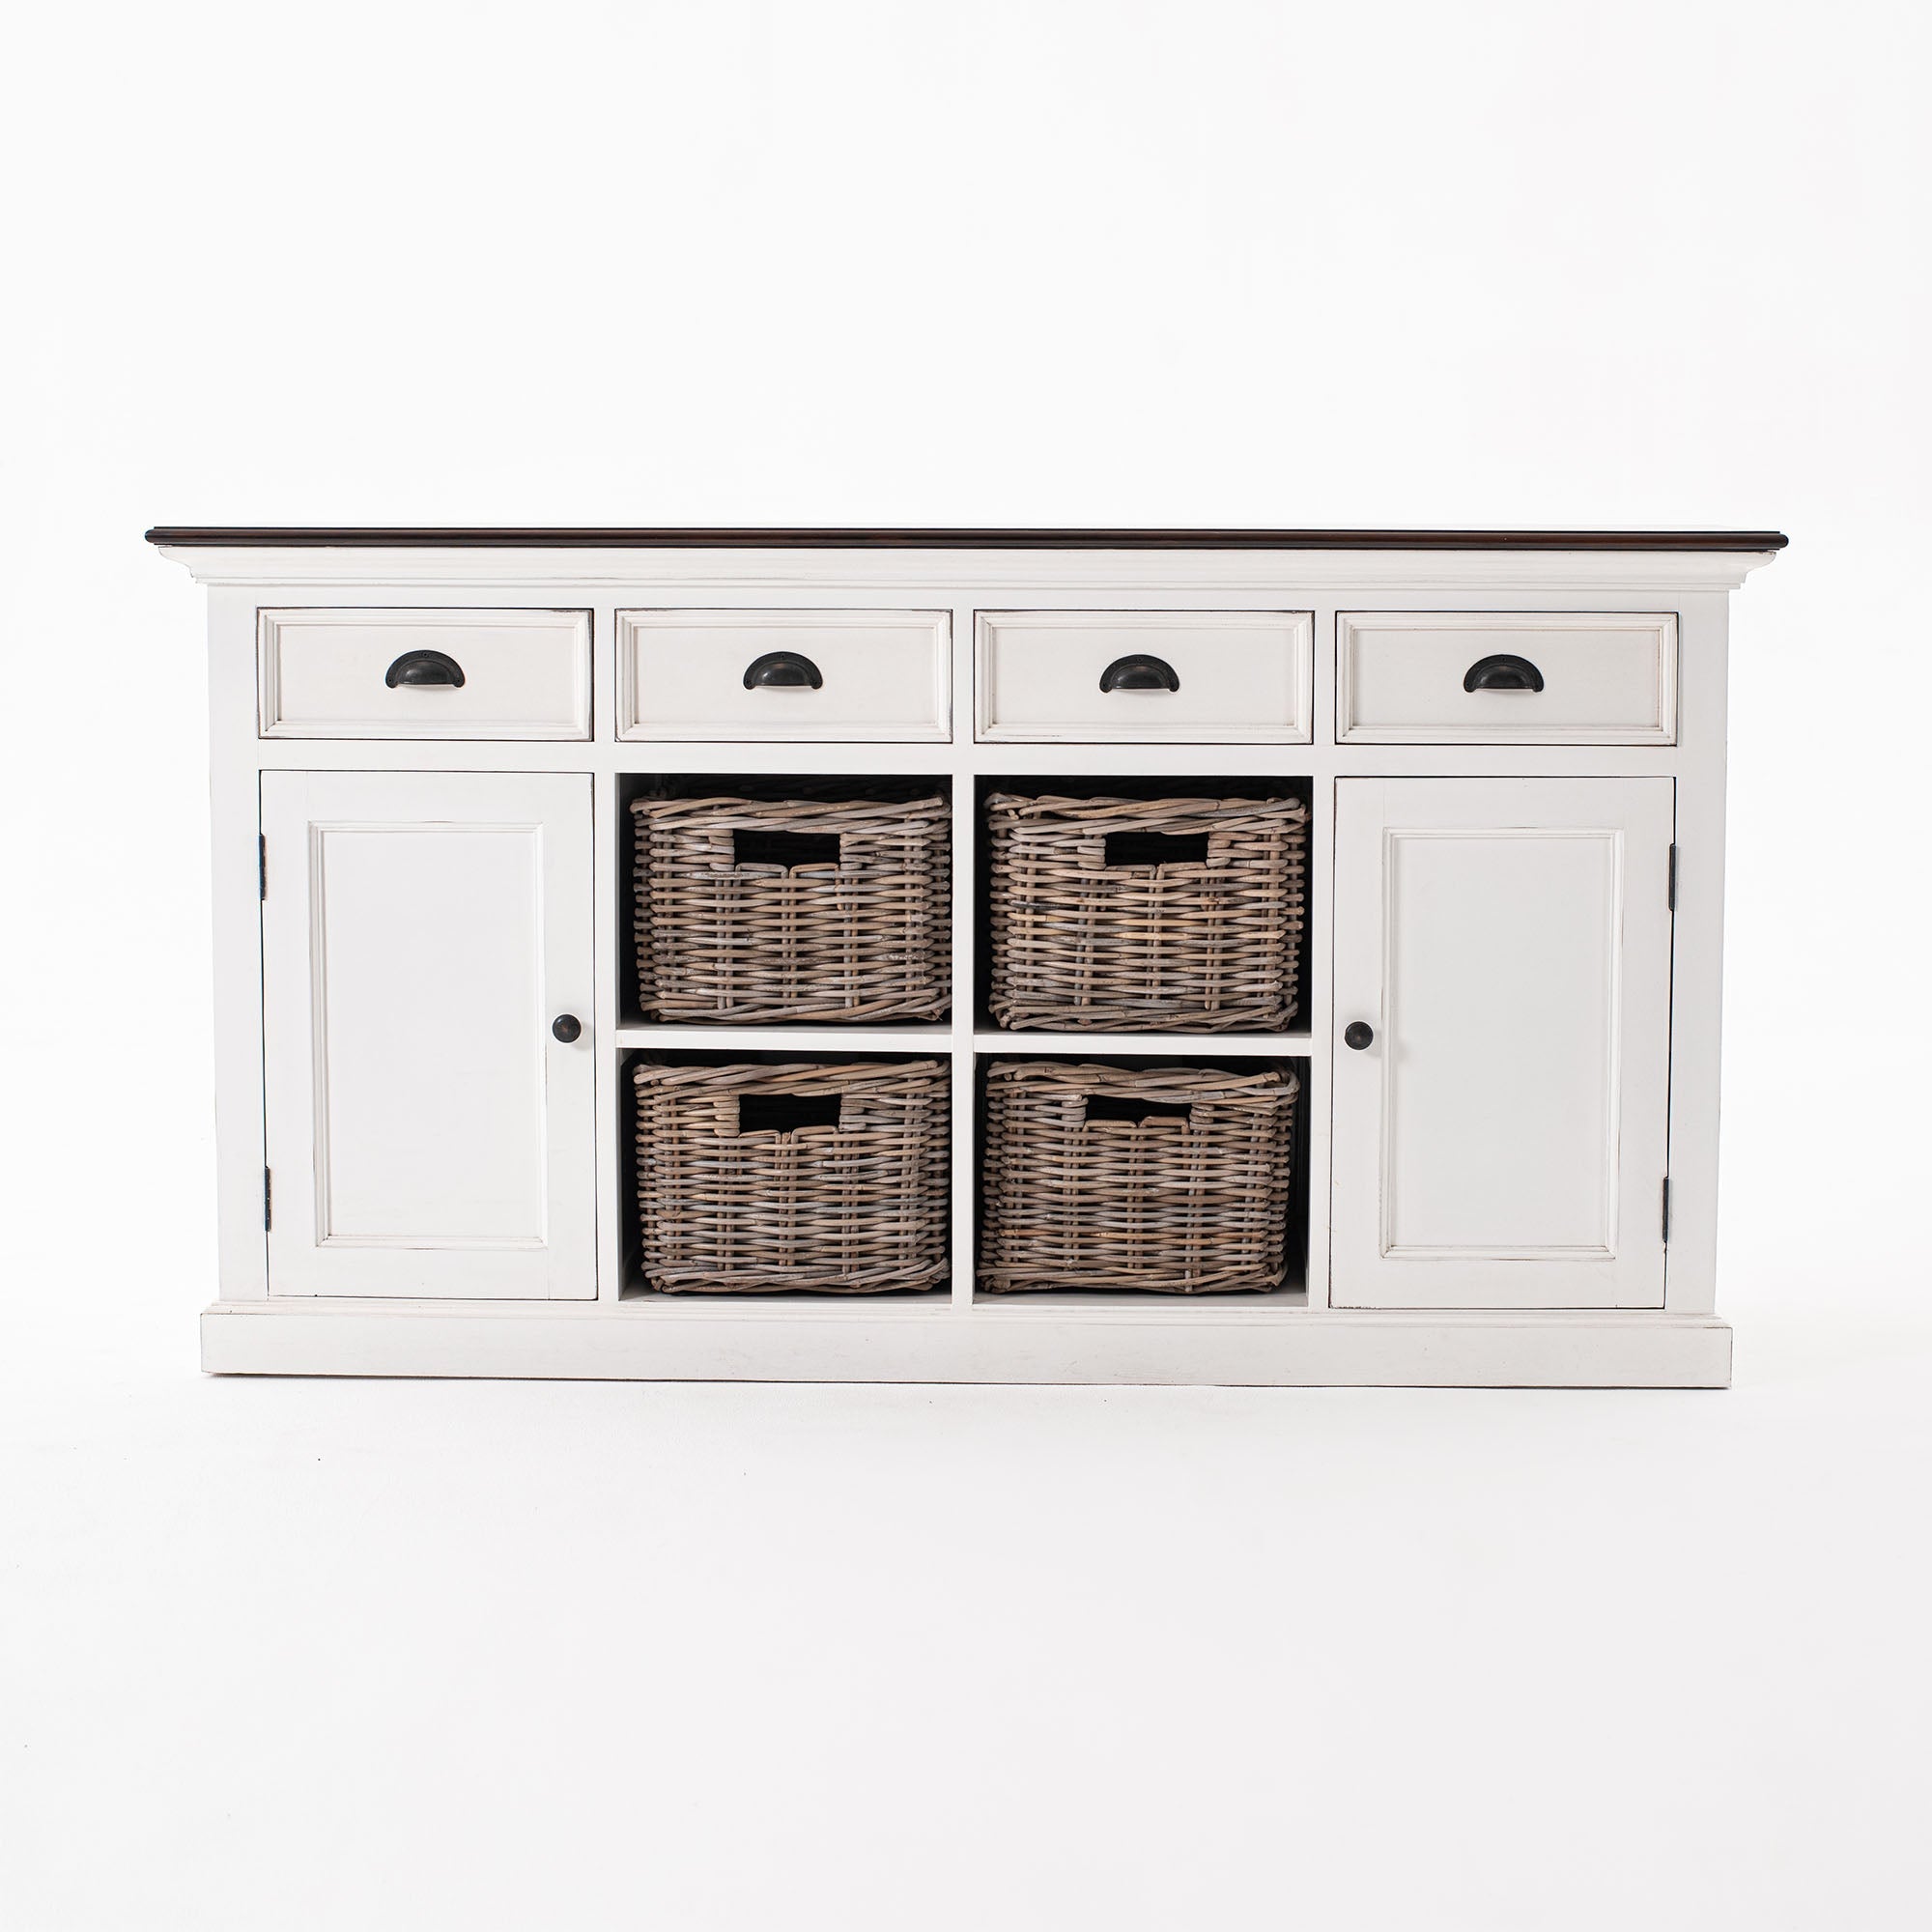 Halifax accent sideboard with 4 baskets